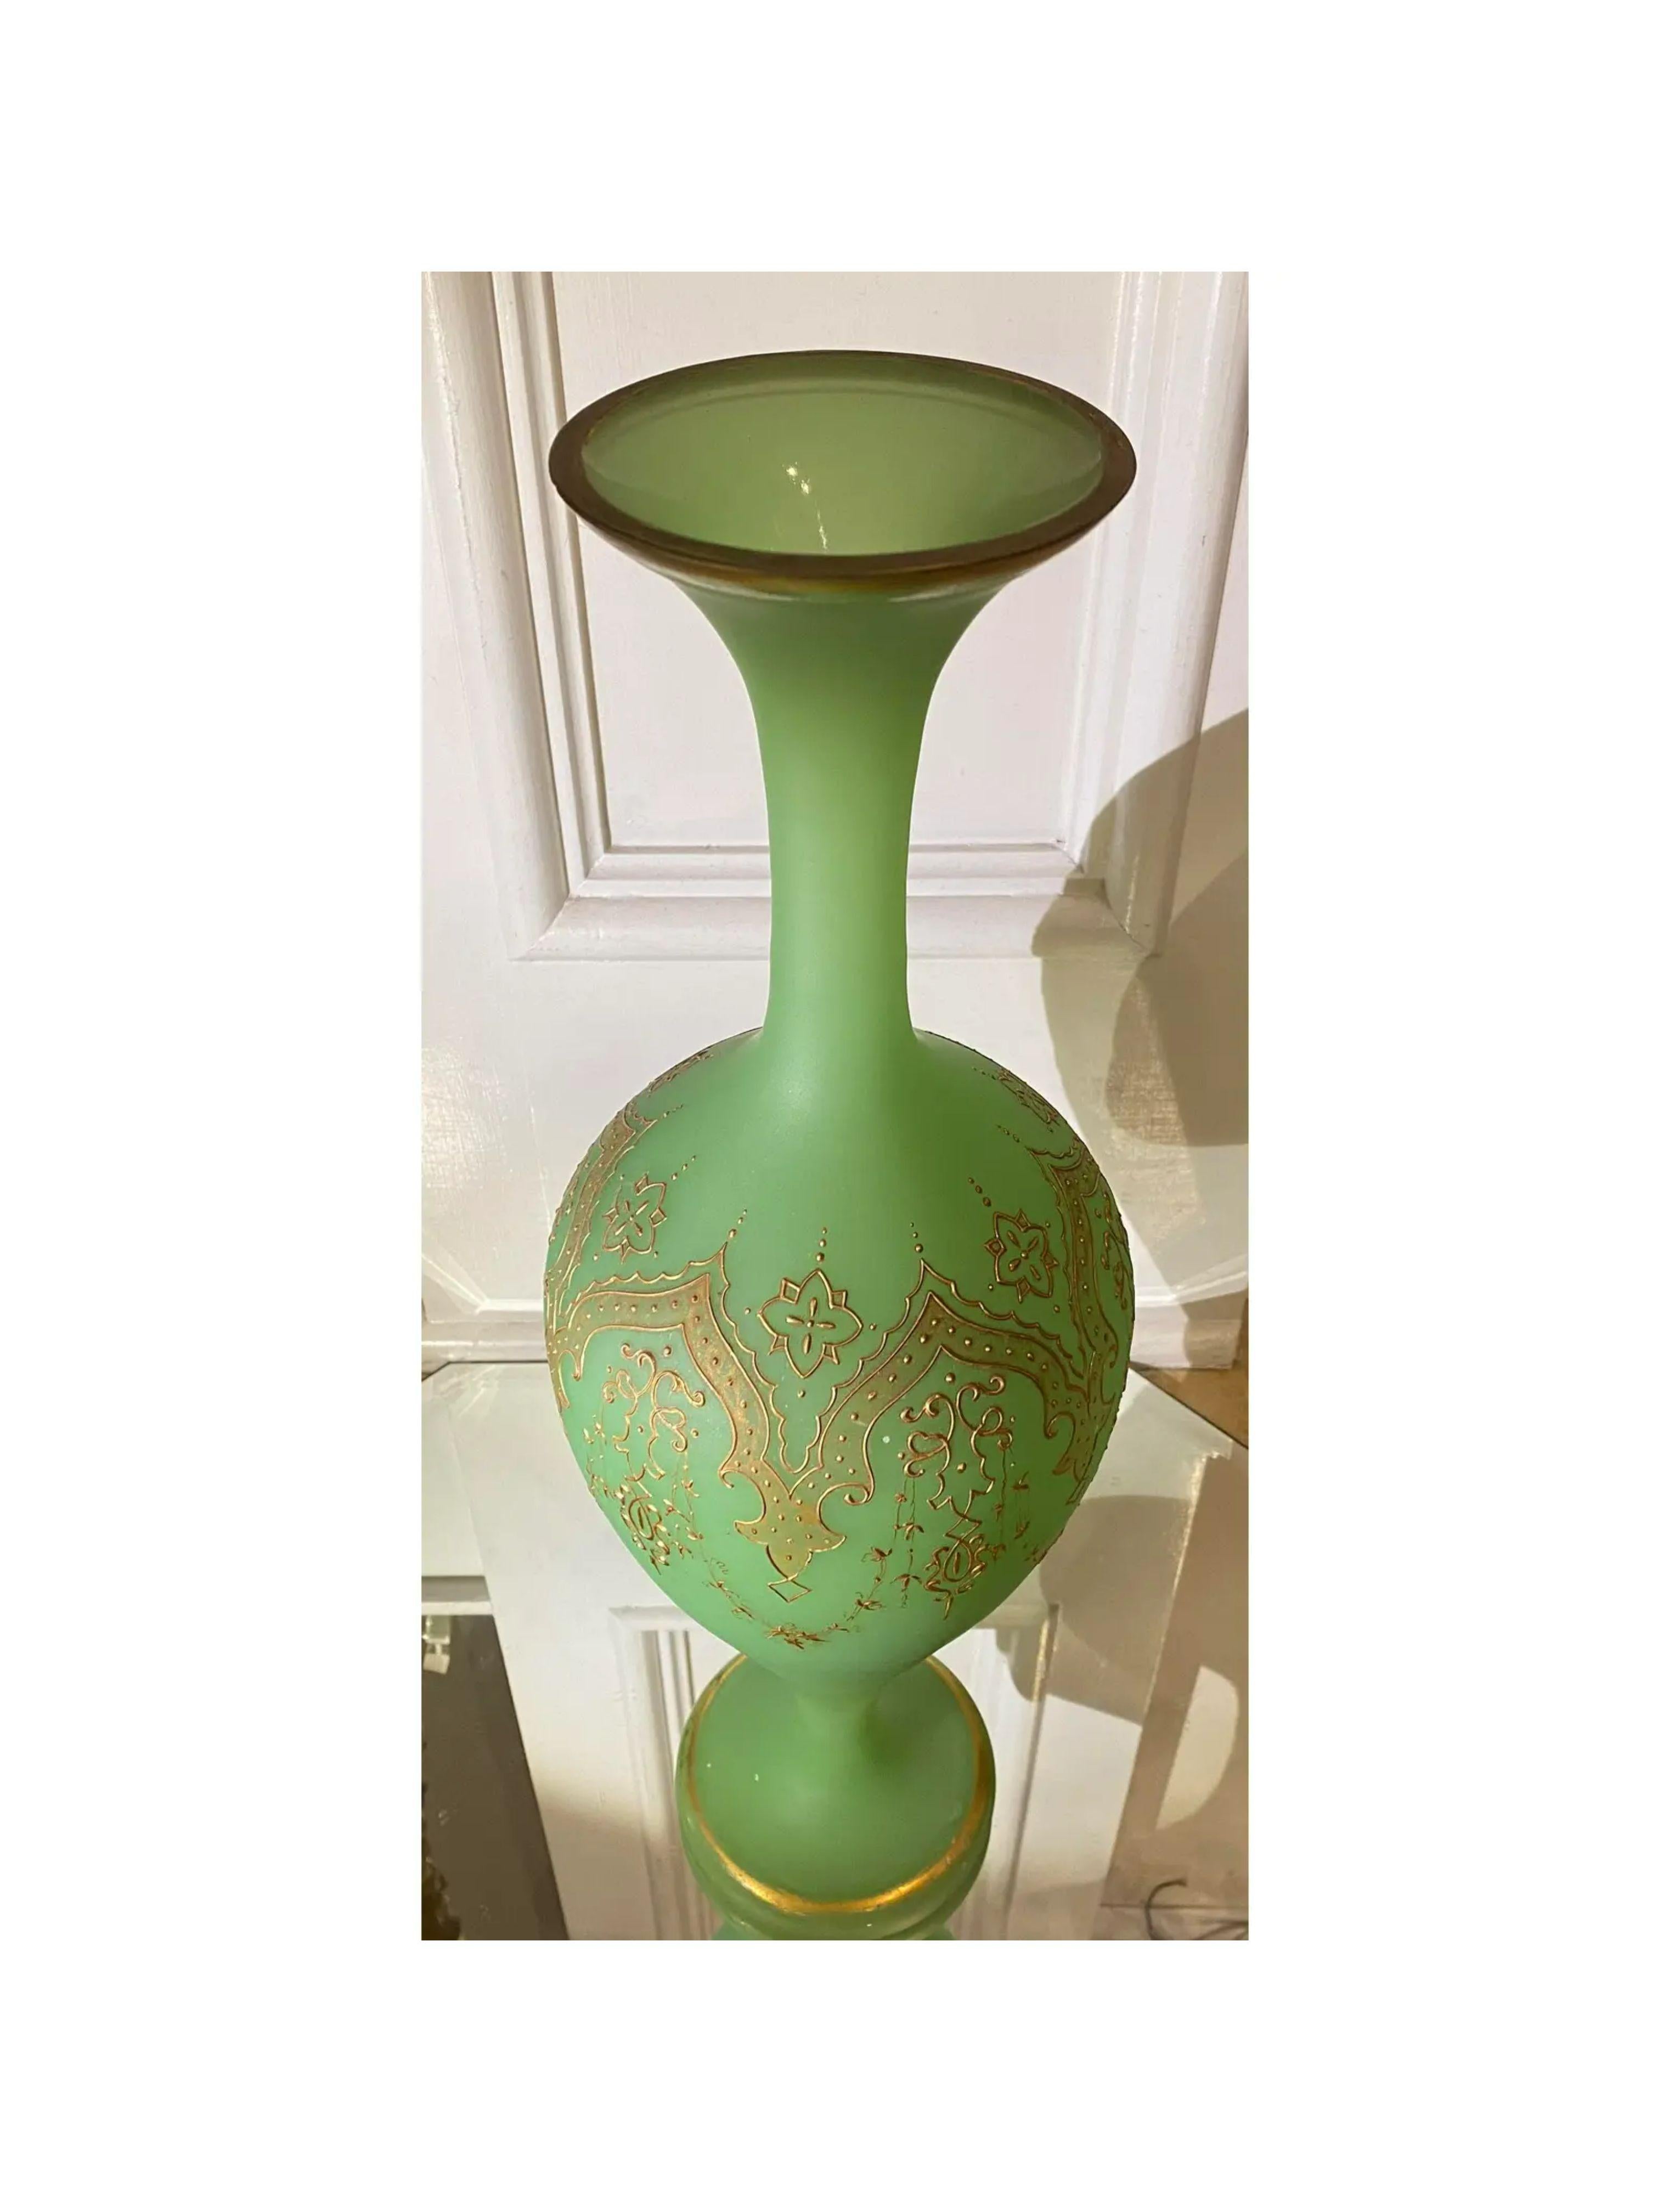 Massive antique Baccarat French Opaline glass vase. Green Opaline glass w gold decoration.

Additional information: 
Materials: Art glass
Color: Light green
Brand: Baccarat
Period: 19th Century
Place of origin: France
Styles: French
Item